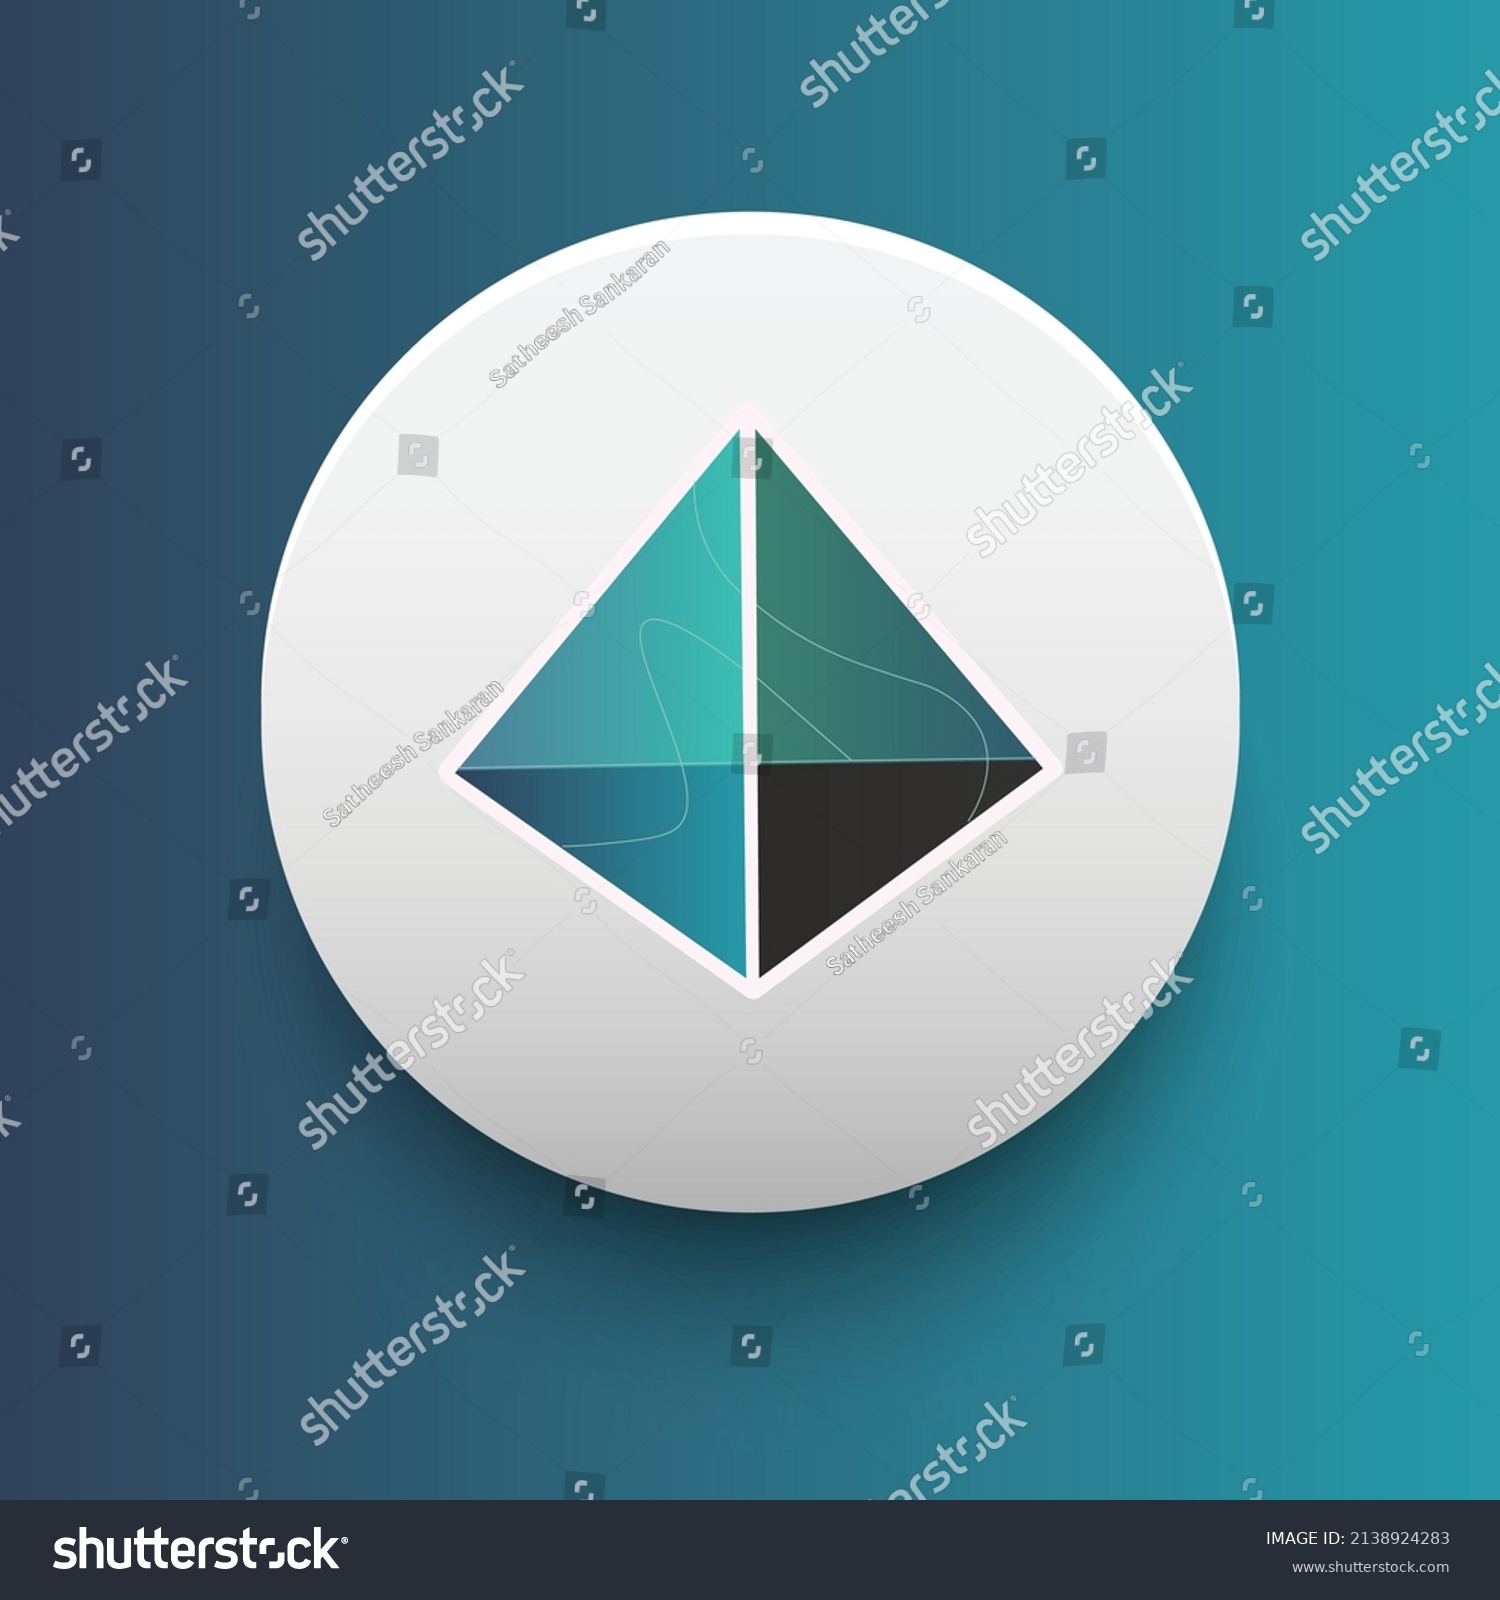 SVG of Blockchain based secure Cryptocurrency coin Aurora (AOA) icon isolated on colored background. Digital virtual money tokens. Decentralized finance technology illustration. Altcoin Vector logos. svg